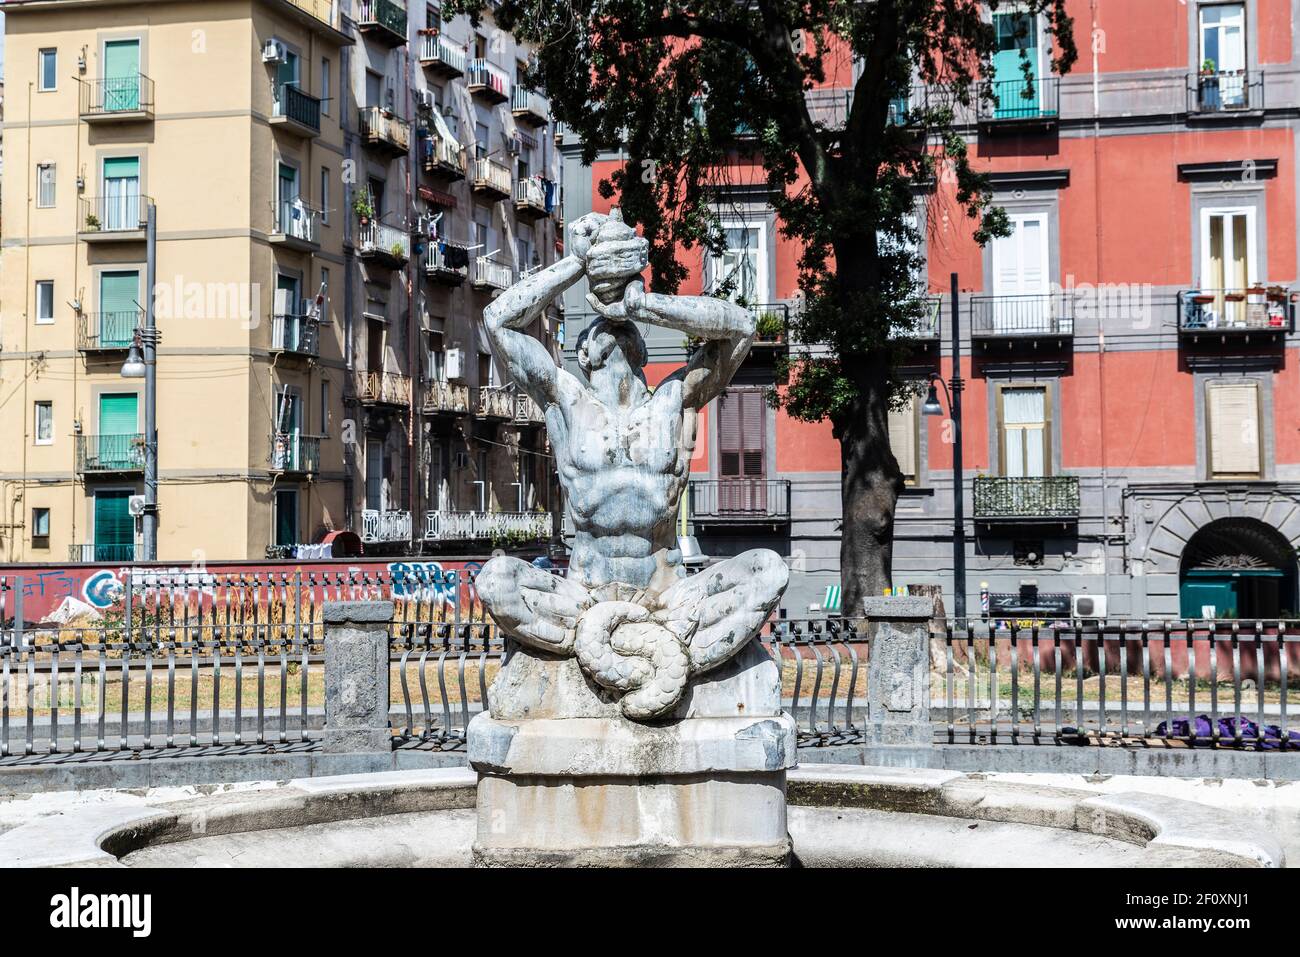 Naples, Italy - September 9, 2019: Fontana del Tritone in Piazza Cavour, ornamental fountain in the historical center of Naples, Italy Stock Photo